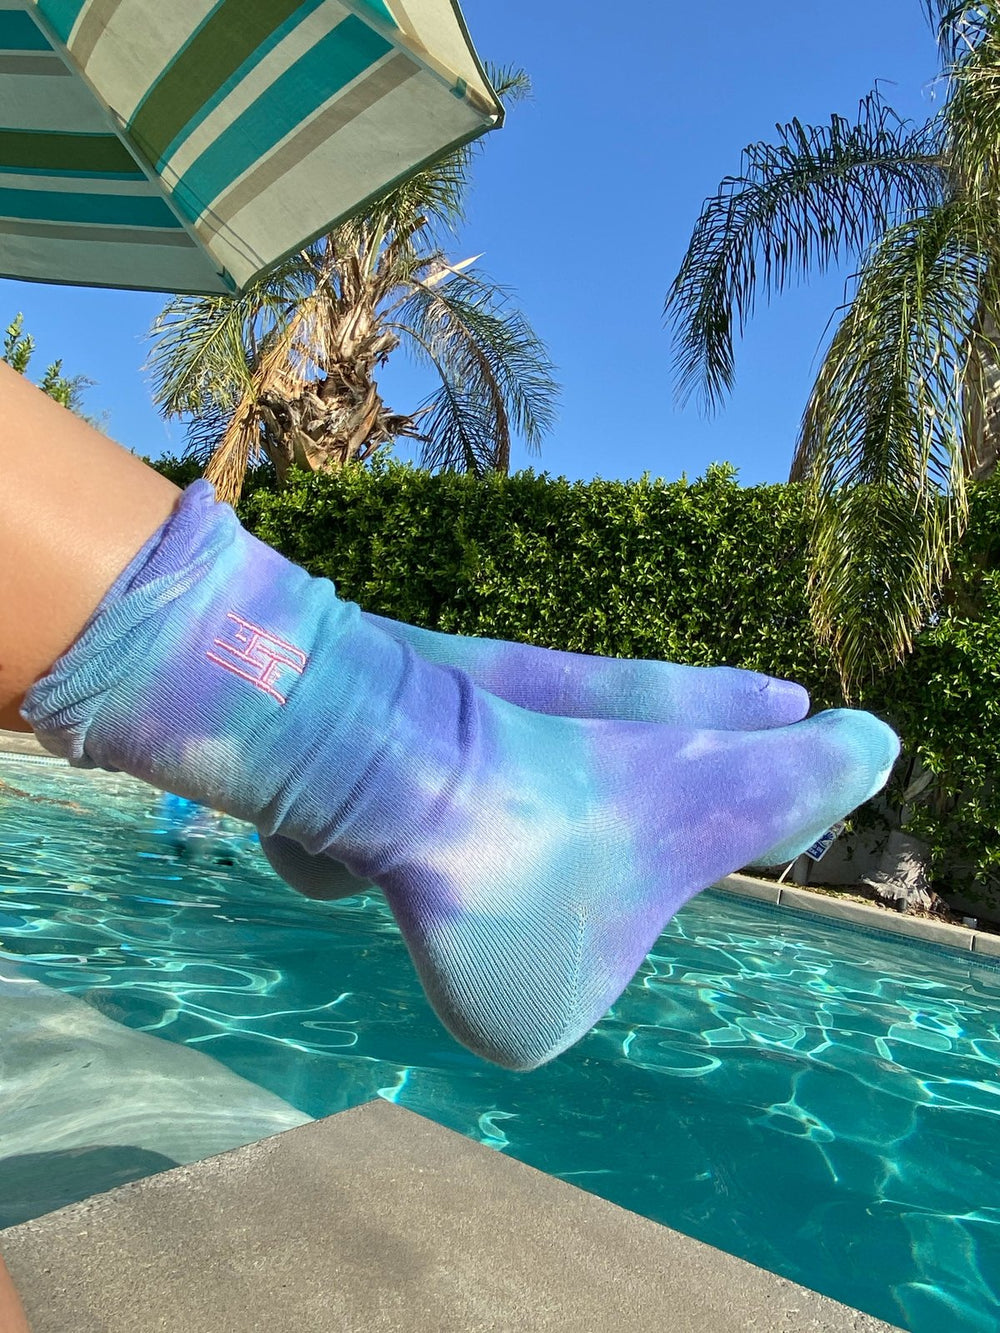 Tie Dye Sock & Scrunchie Set - Aqua Purple
Tie Dye Ruffle Sock with Matching Tie Dye Scrunchie Set The tie dye phenomenon lives on! These socks are crafted to perfection in this tie dye soft stretch cotton socks with a ruffle trim. and Each pair comes with matching large tie dye velvet scrunchie and personalized packaging. Hand-dyed design. Each pair is unique due to the dyeing process and come in a longer length for multiple styling options. Wear them with your favorite sneakers, sandals and heels. With or